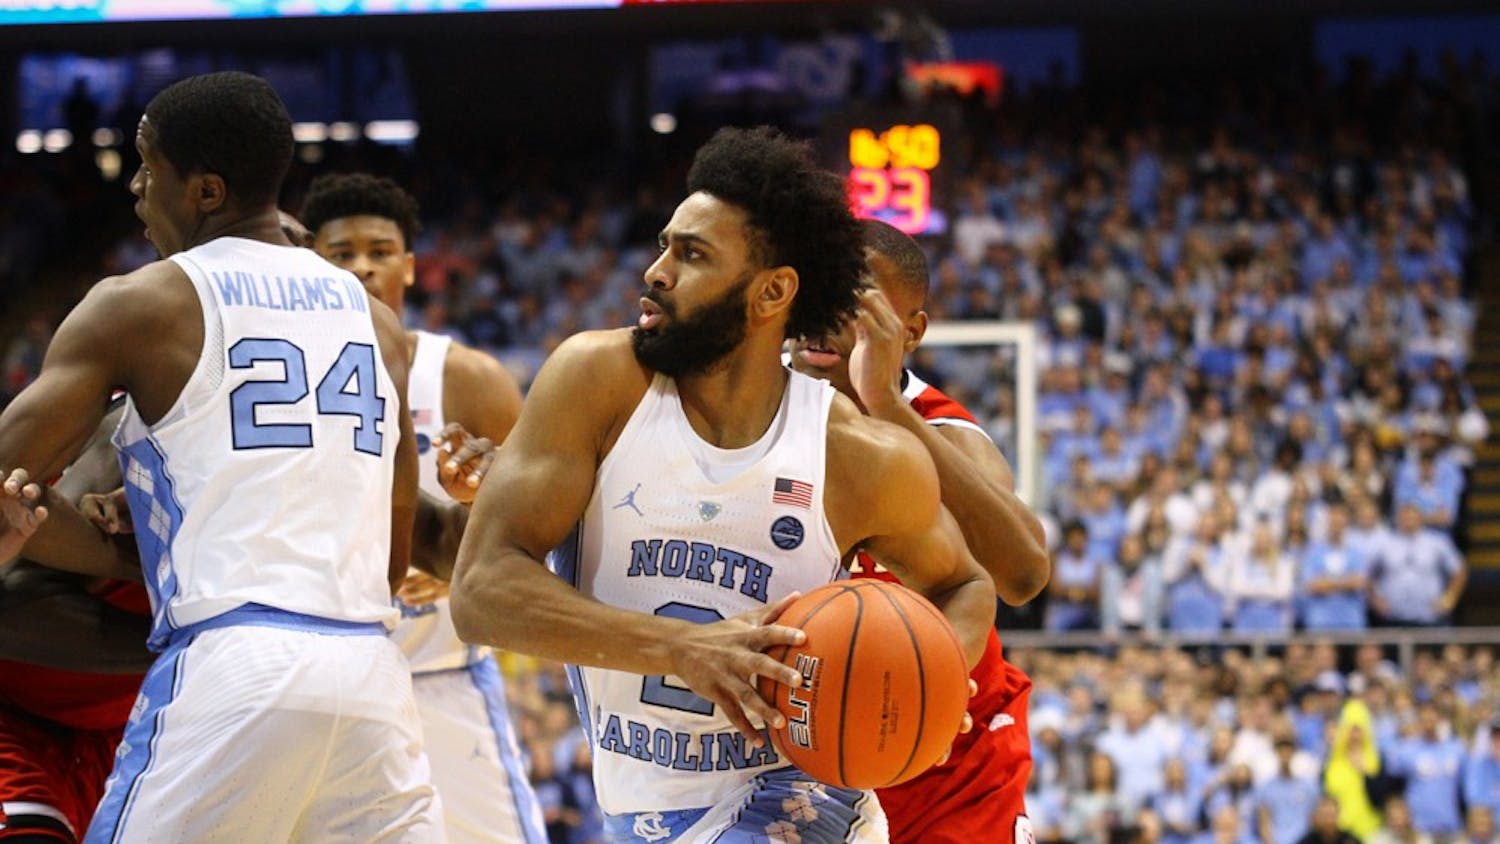 Junior point guard Joel Berry II (2) goes up for a lay-up early in the first half against N.C. State.